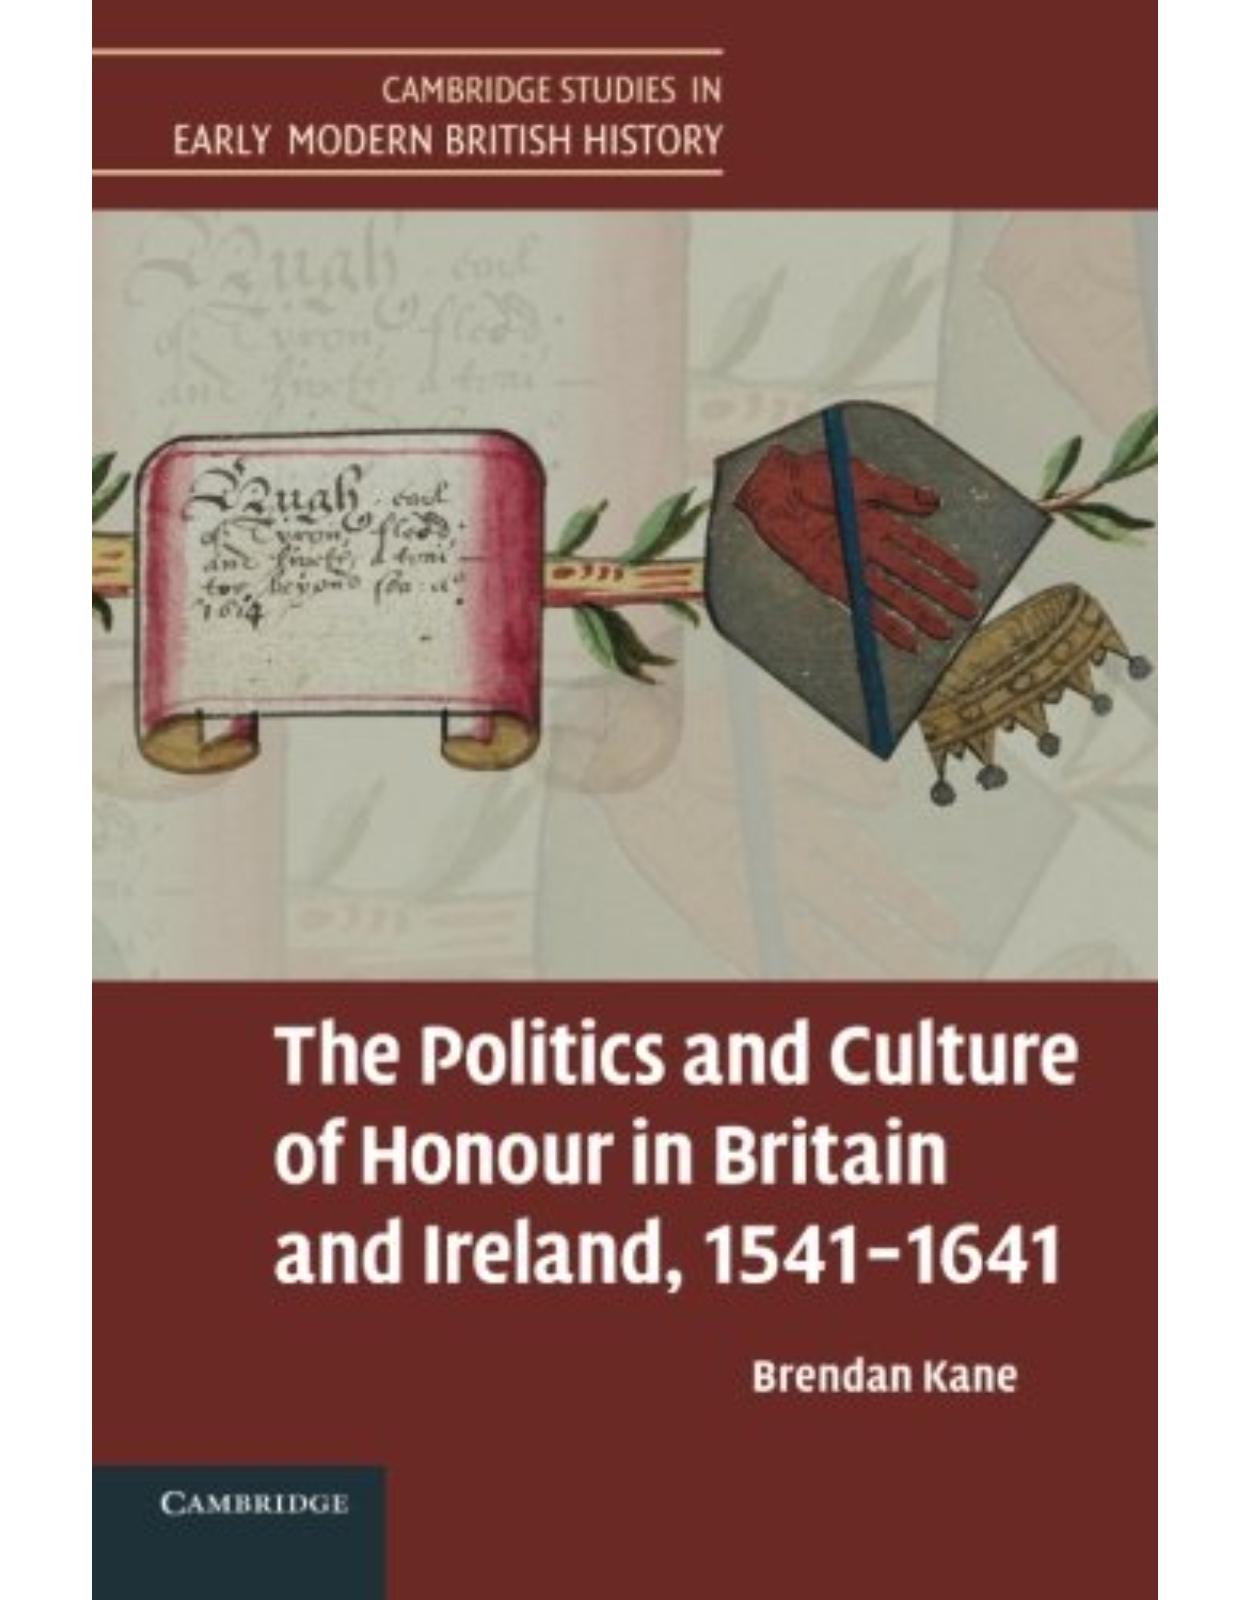 The Politics and Culture of Honour in Britain and Ireland, 1541-1641 (Cambridge Studies in Early Modern British History)